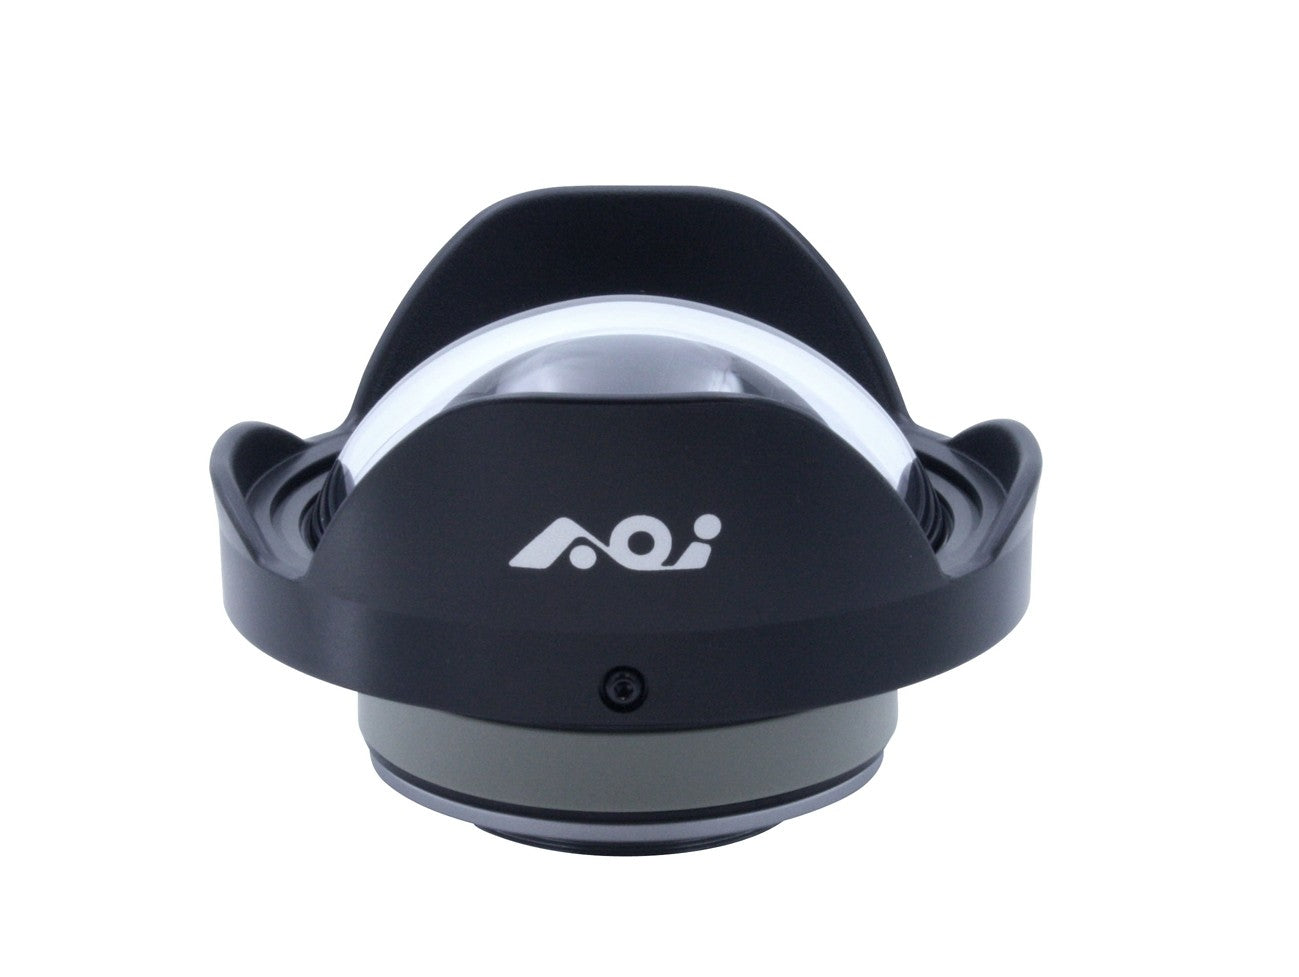 (((NEW))) AOI UWL-400A Wide-angle Lens (Not Included QRS-01-AD3)